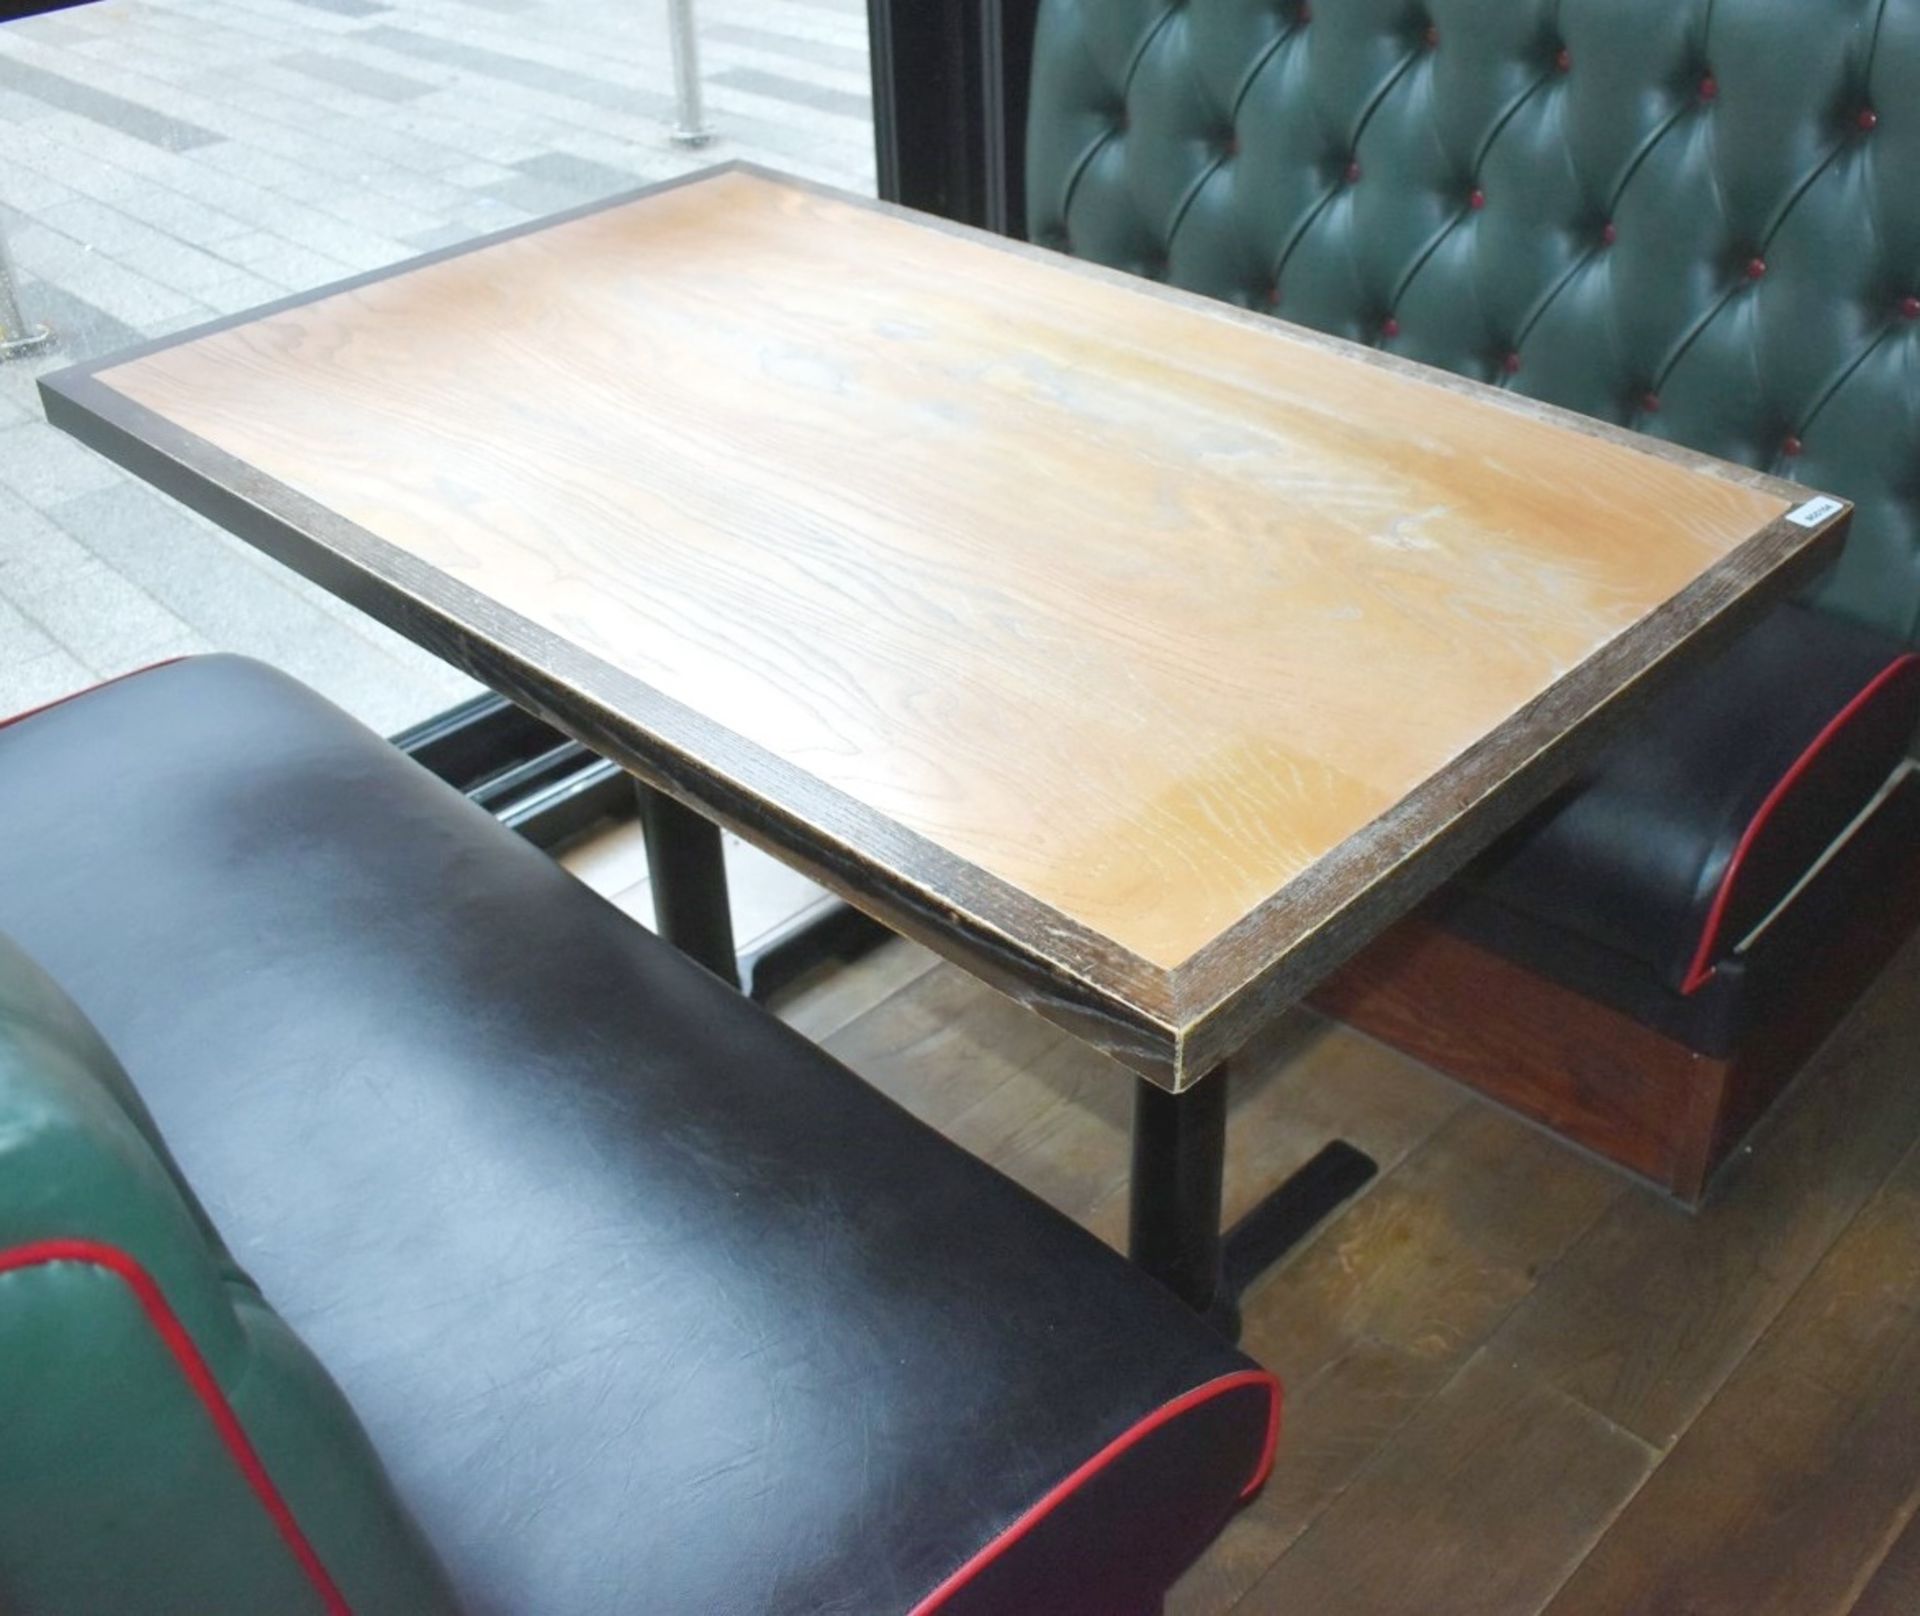 1 x Rectangular Restaurant Table - Seats Upto 4 Persons - Two Tone Wooden Top and Cast Iron Bases